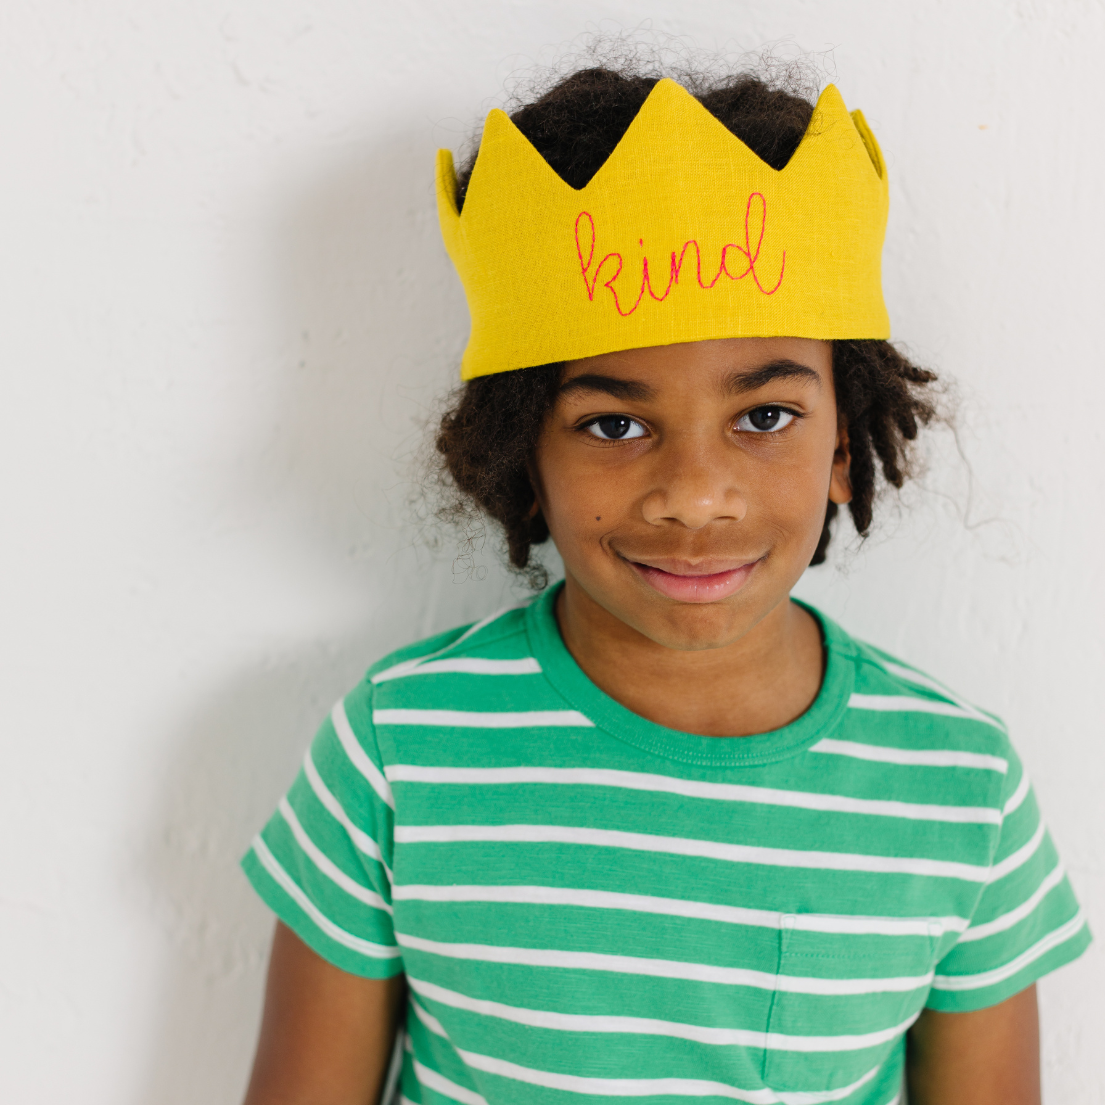 Fabric Crowns with Affirmations | "Beautiful embroidery!"